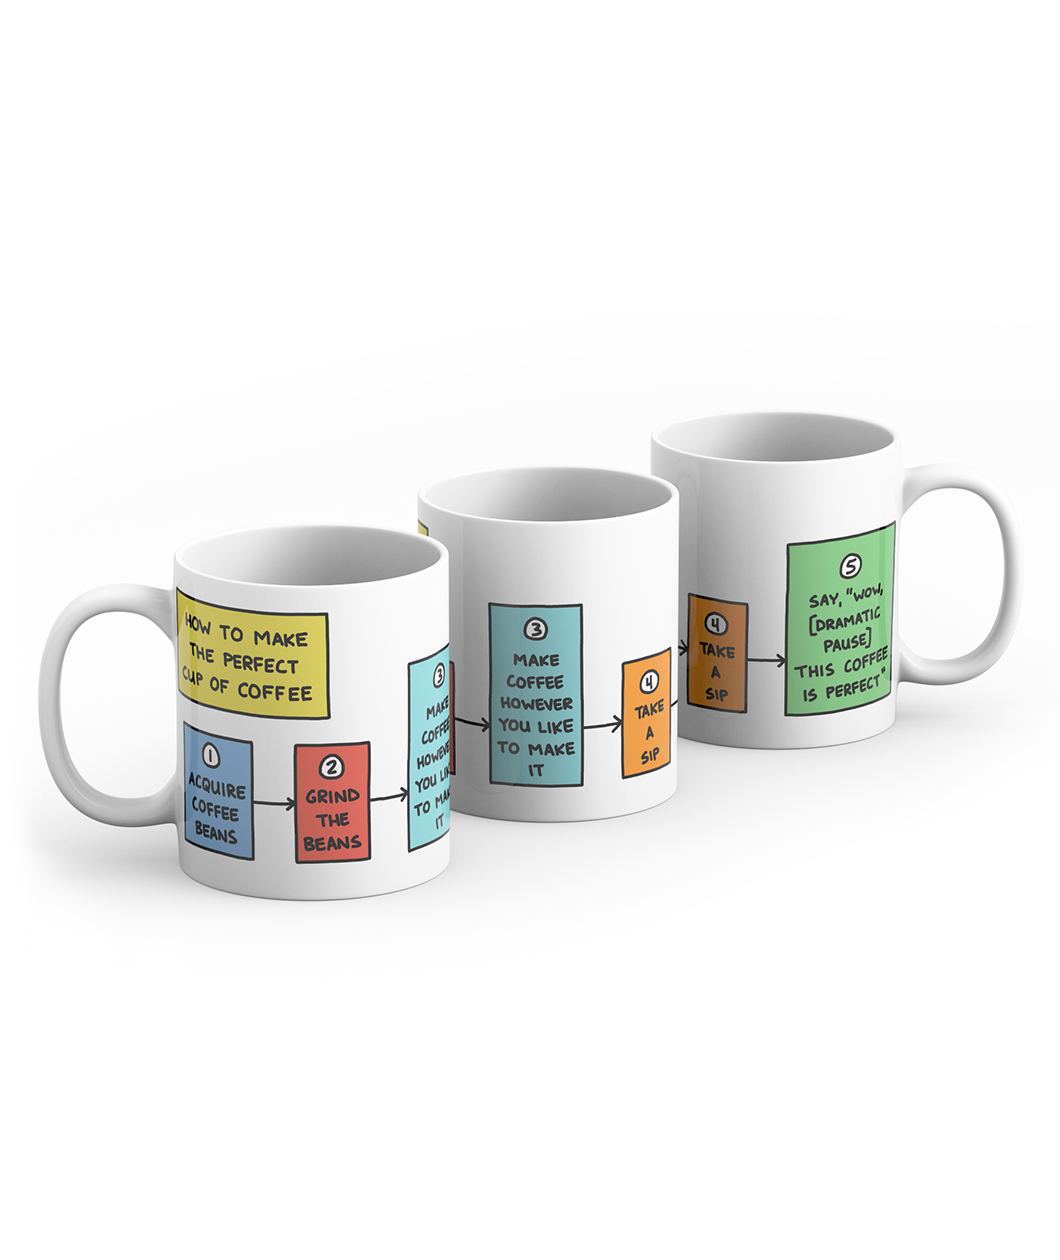 Three white mugs sit in a row showing all the different sides of the same mug which features five different steps of 